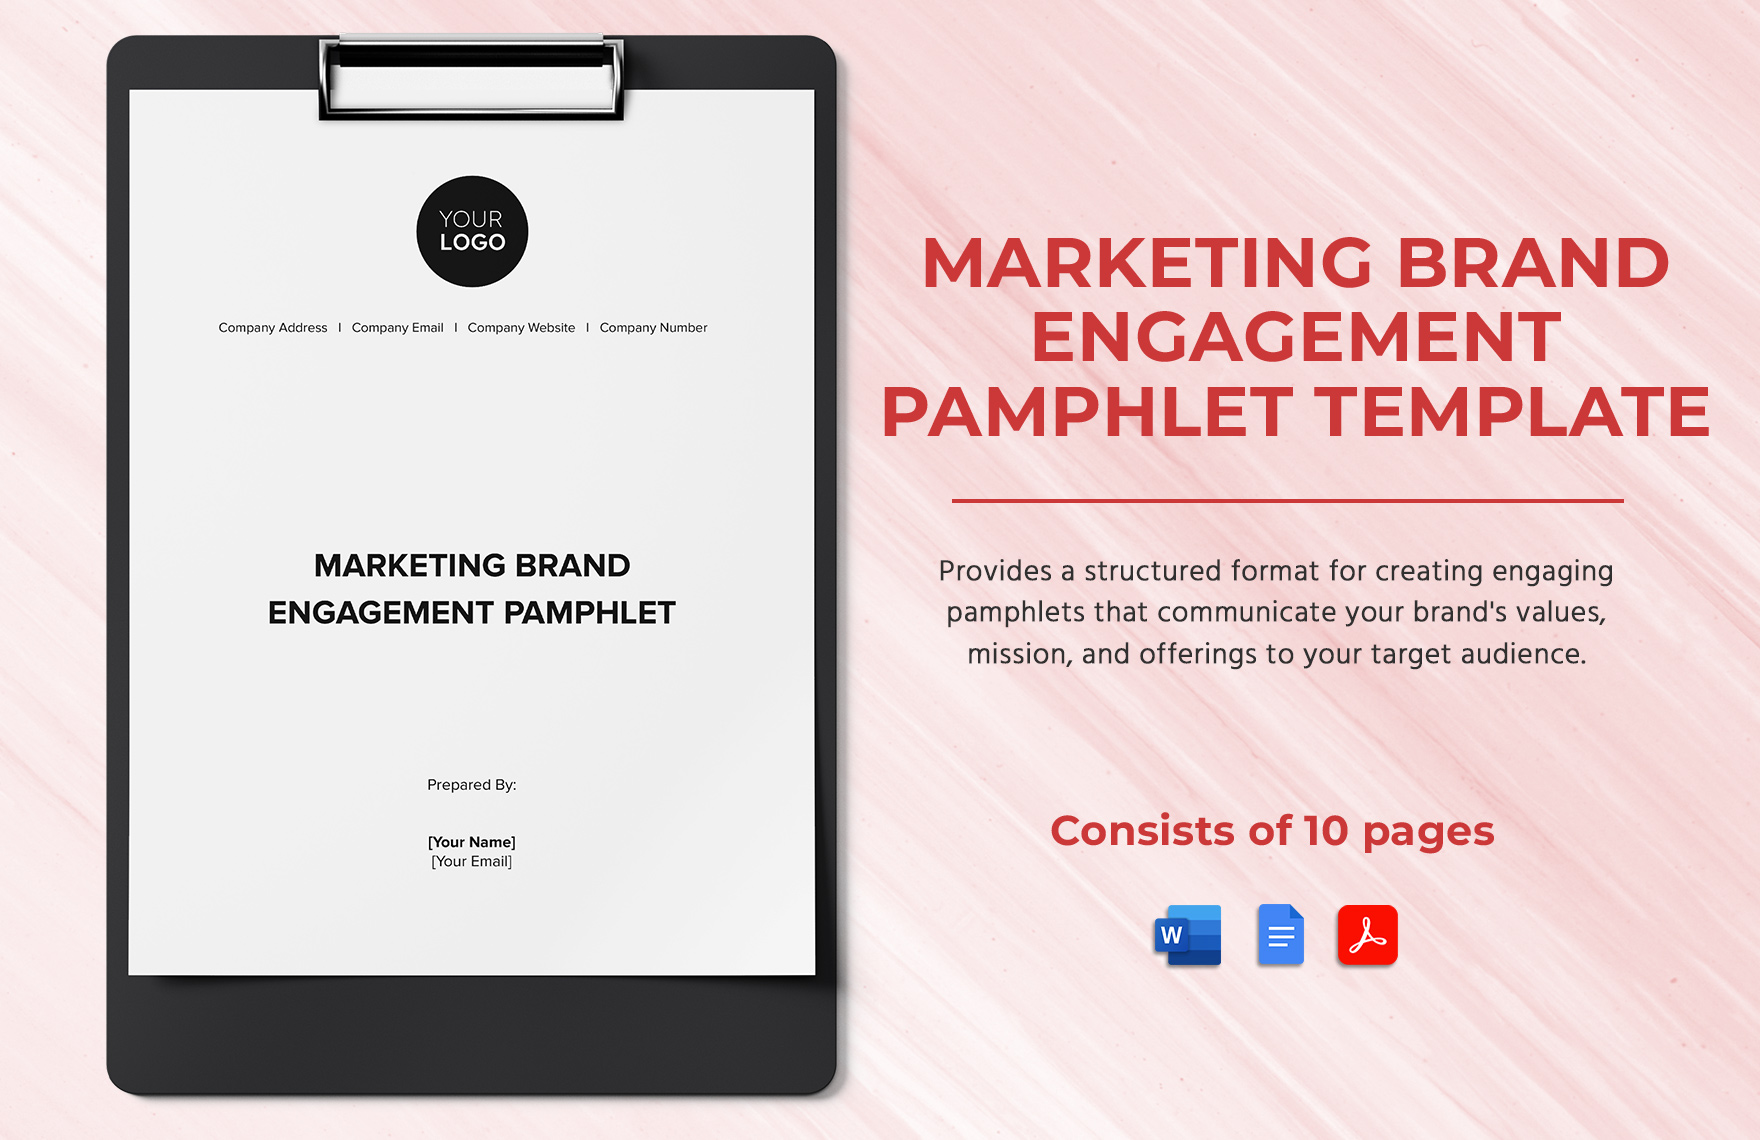 Marketing Brand Engagement Pamphlet Template in Word, Google Docs, PDF